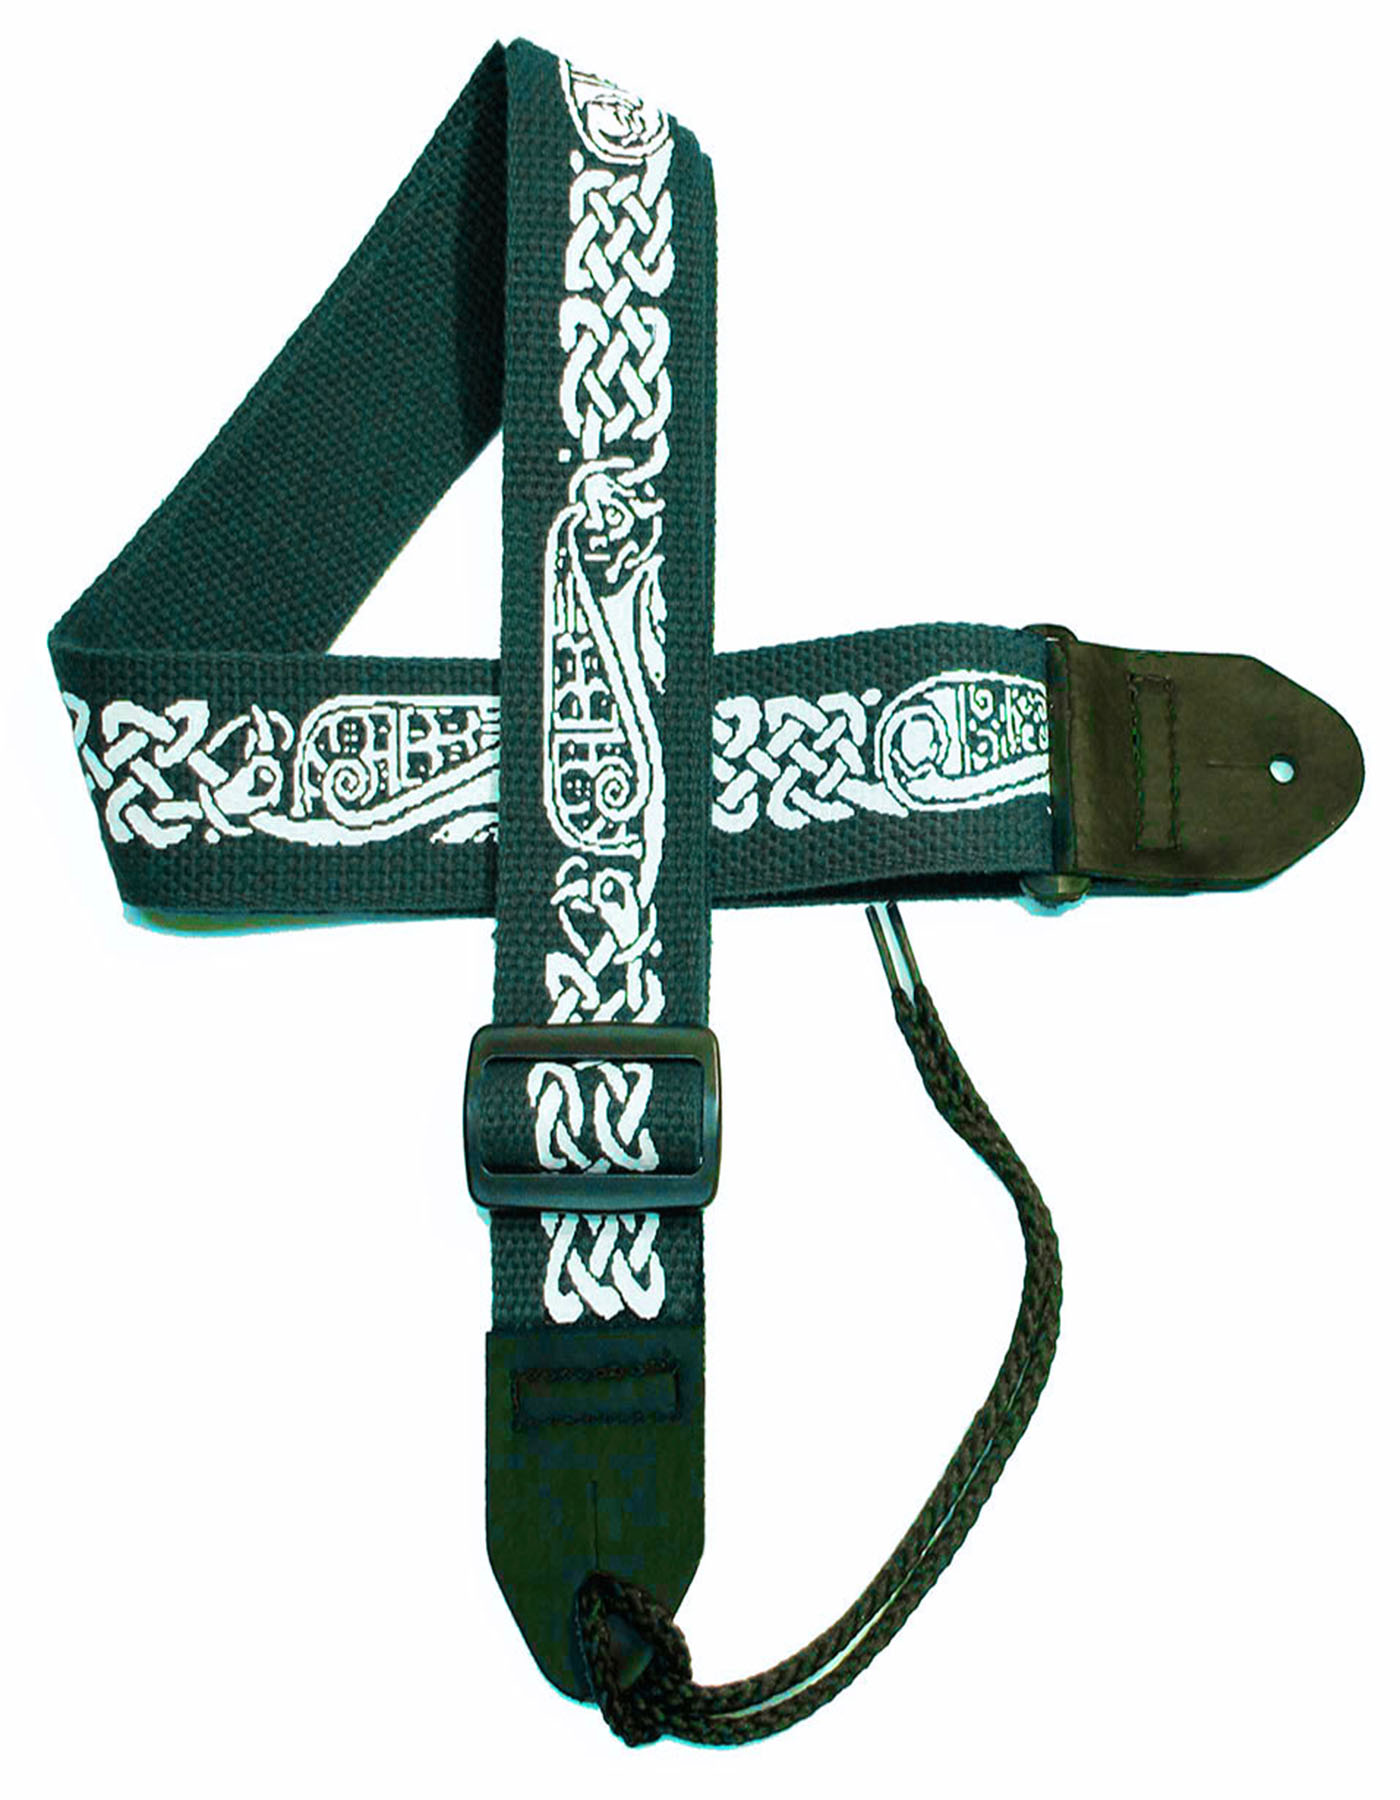 Celtic Knot Design 2 Poly Guitar strap with Leather Ends Ireland & Celtic Knot design on black background. Green Ireland Guitar Strap